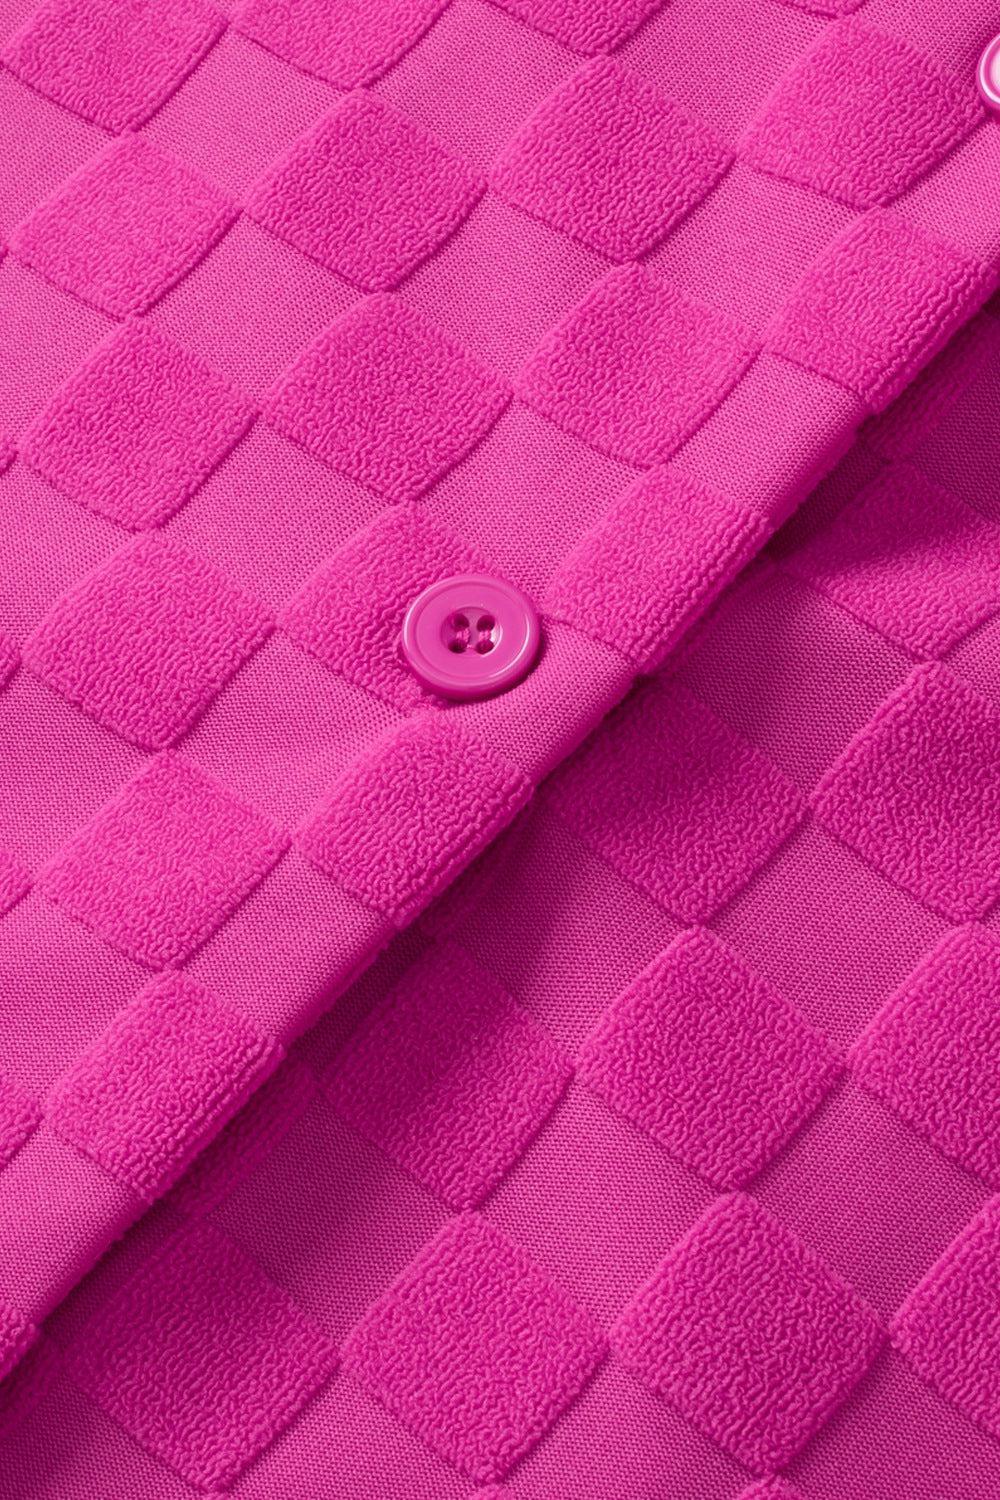 a close up of a pink jacket with buttons